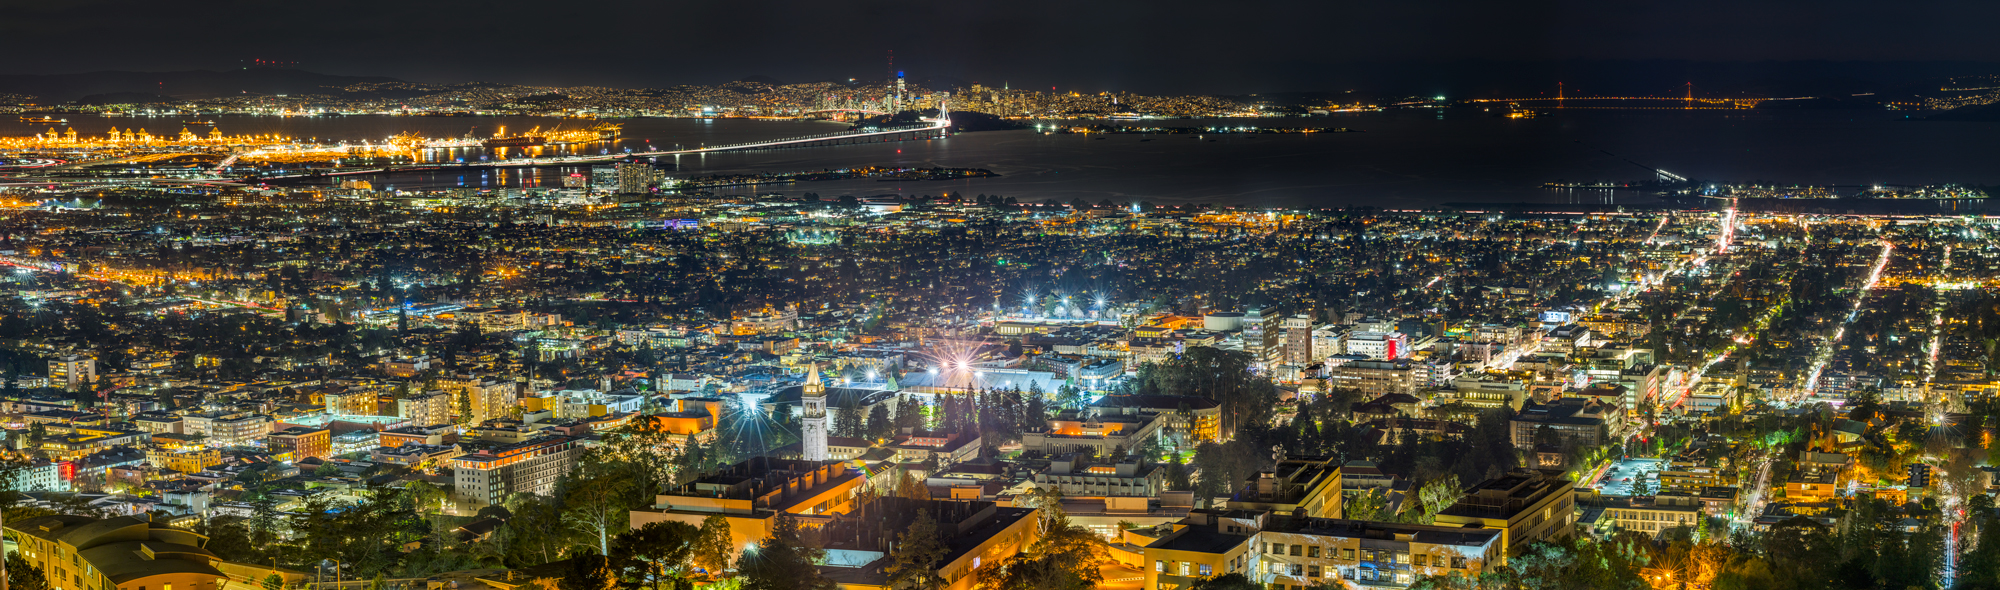 Berkeley Sather Tower Campenile Clock Tower East Bay California UC Berkeley Oakland Full Moon Panorama Fine Art Landscape Photography Mark Lilly